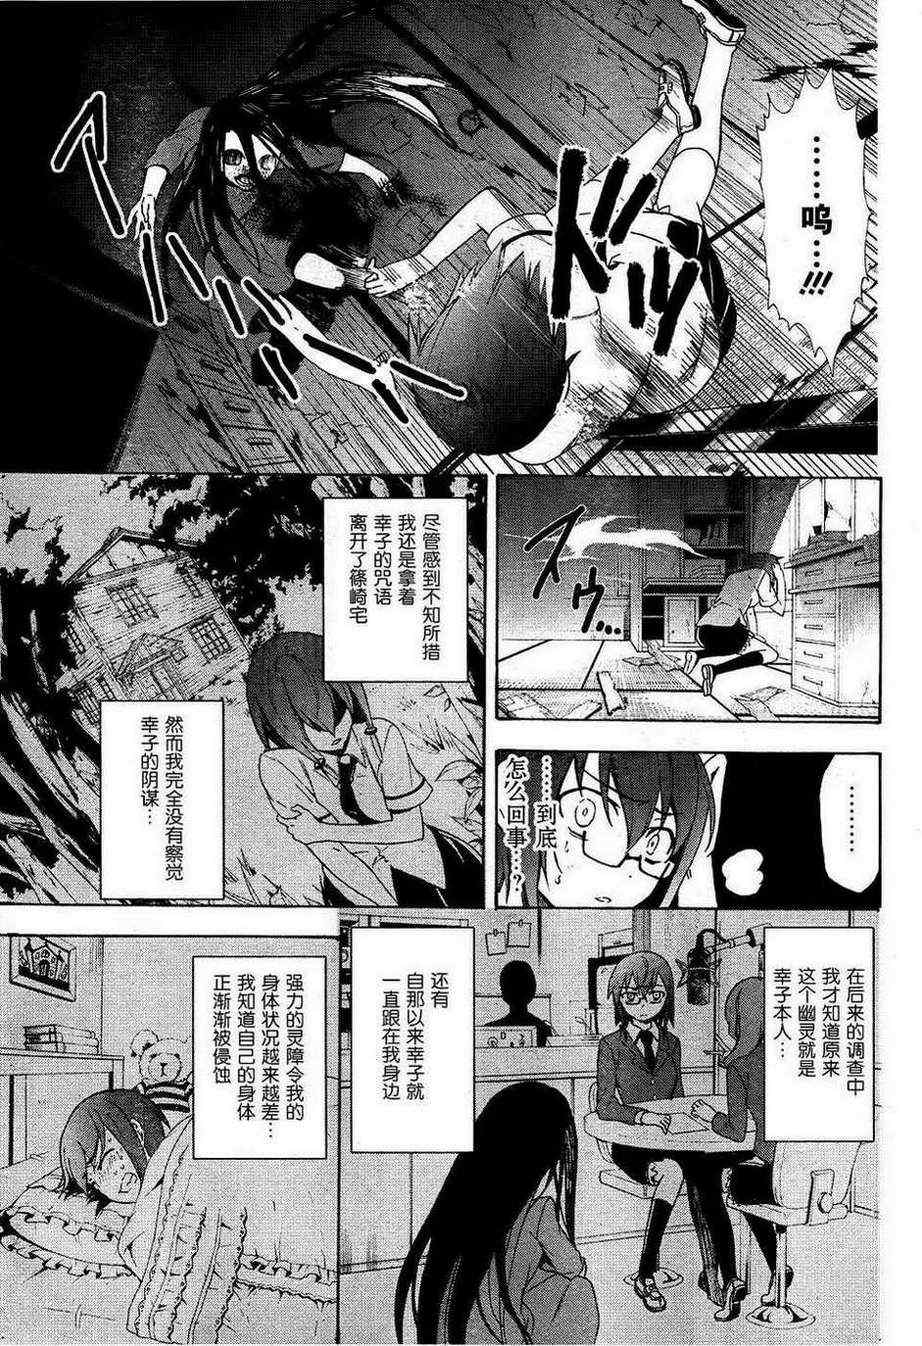 BLOOD_COVERED - 第38话 - 1